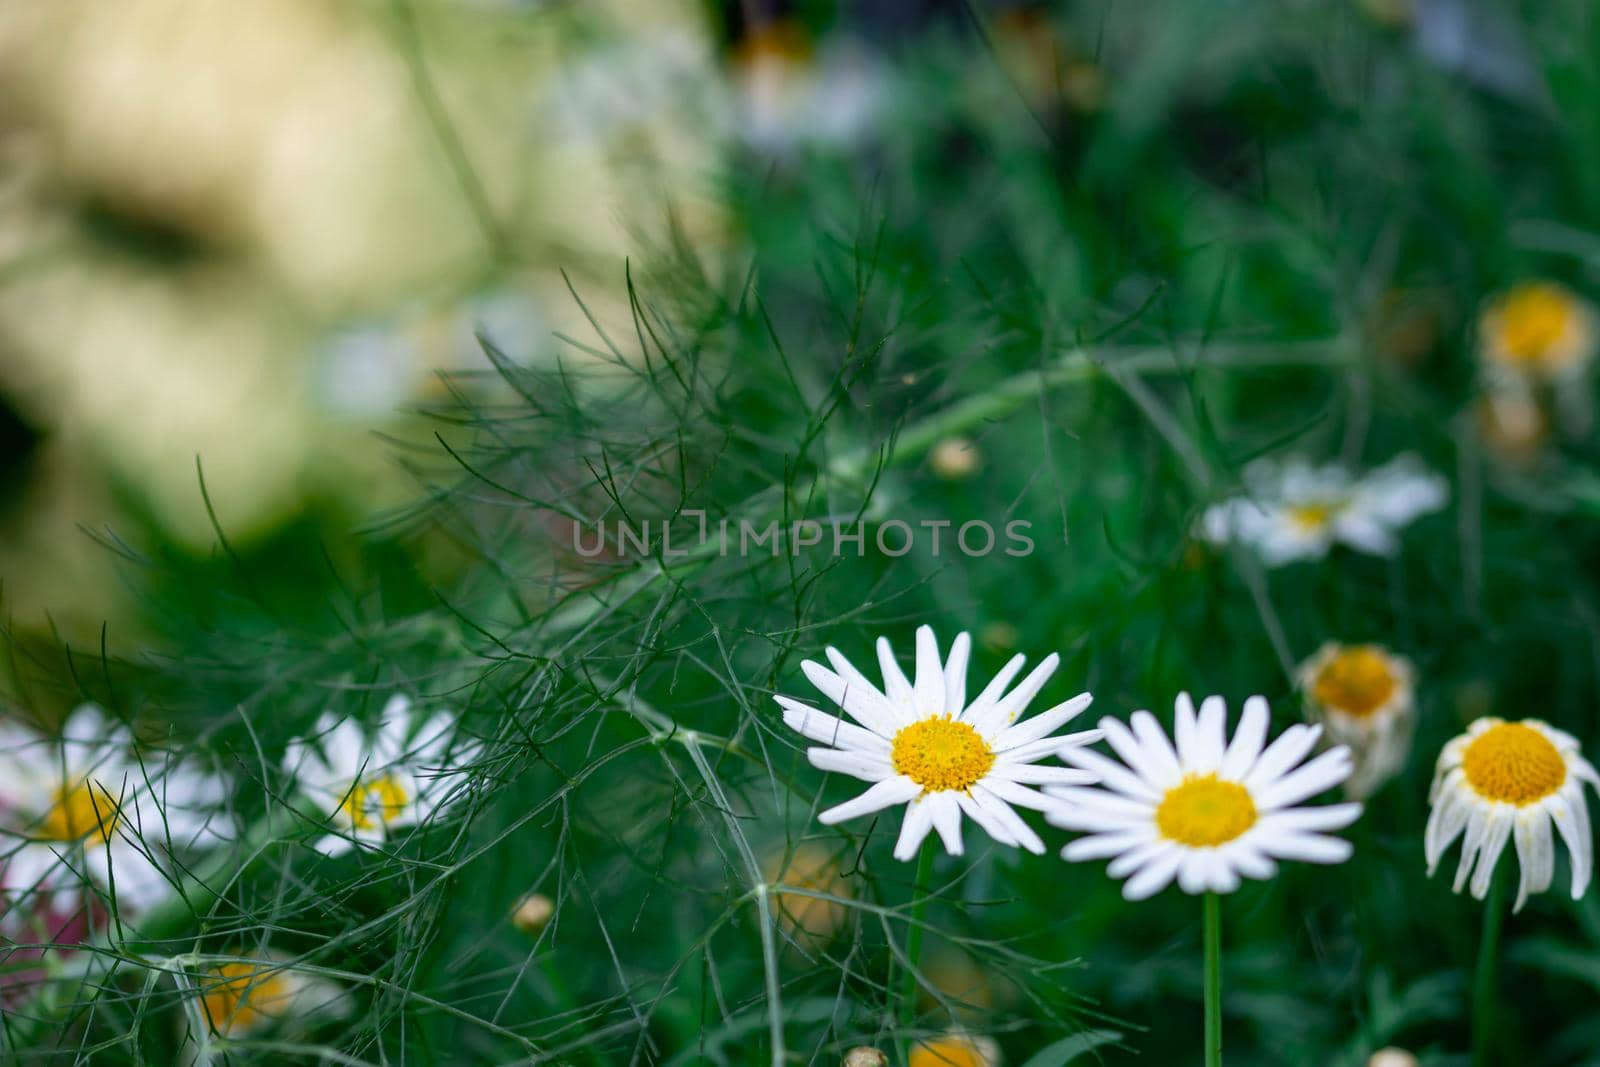 horizontal full lenght shot of yellow flowers with white petals with soft green blurry background image with some space for text